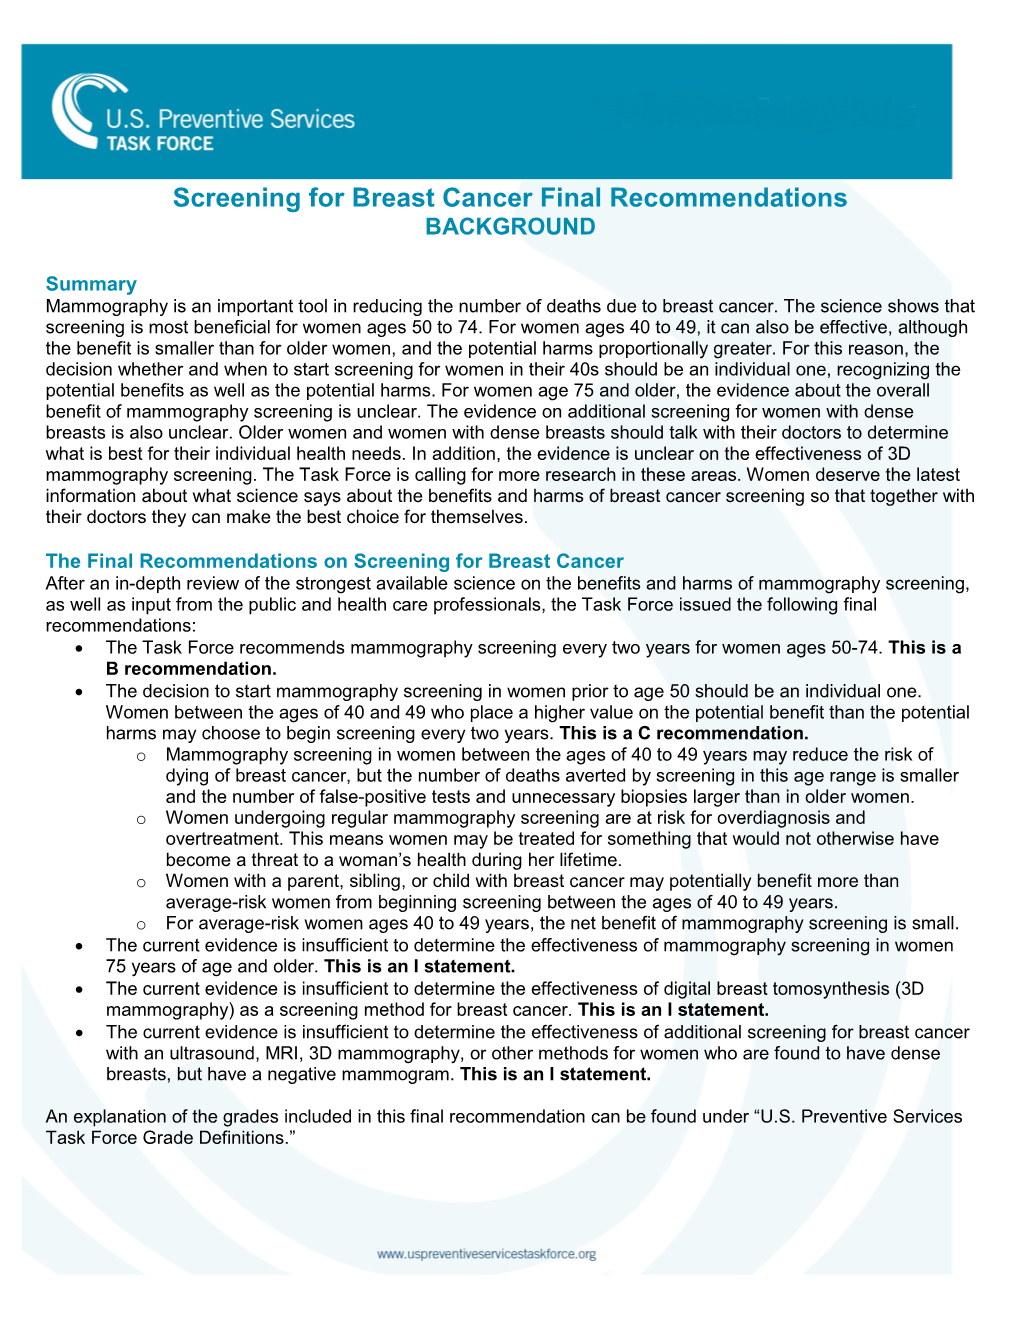 Screening for Breast Cancer Background